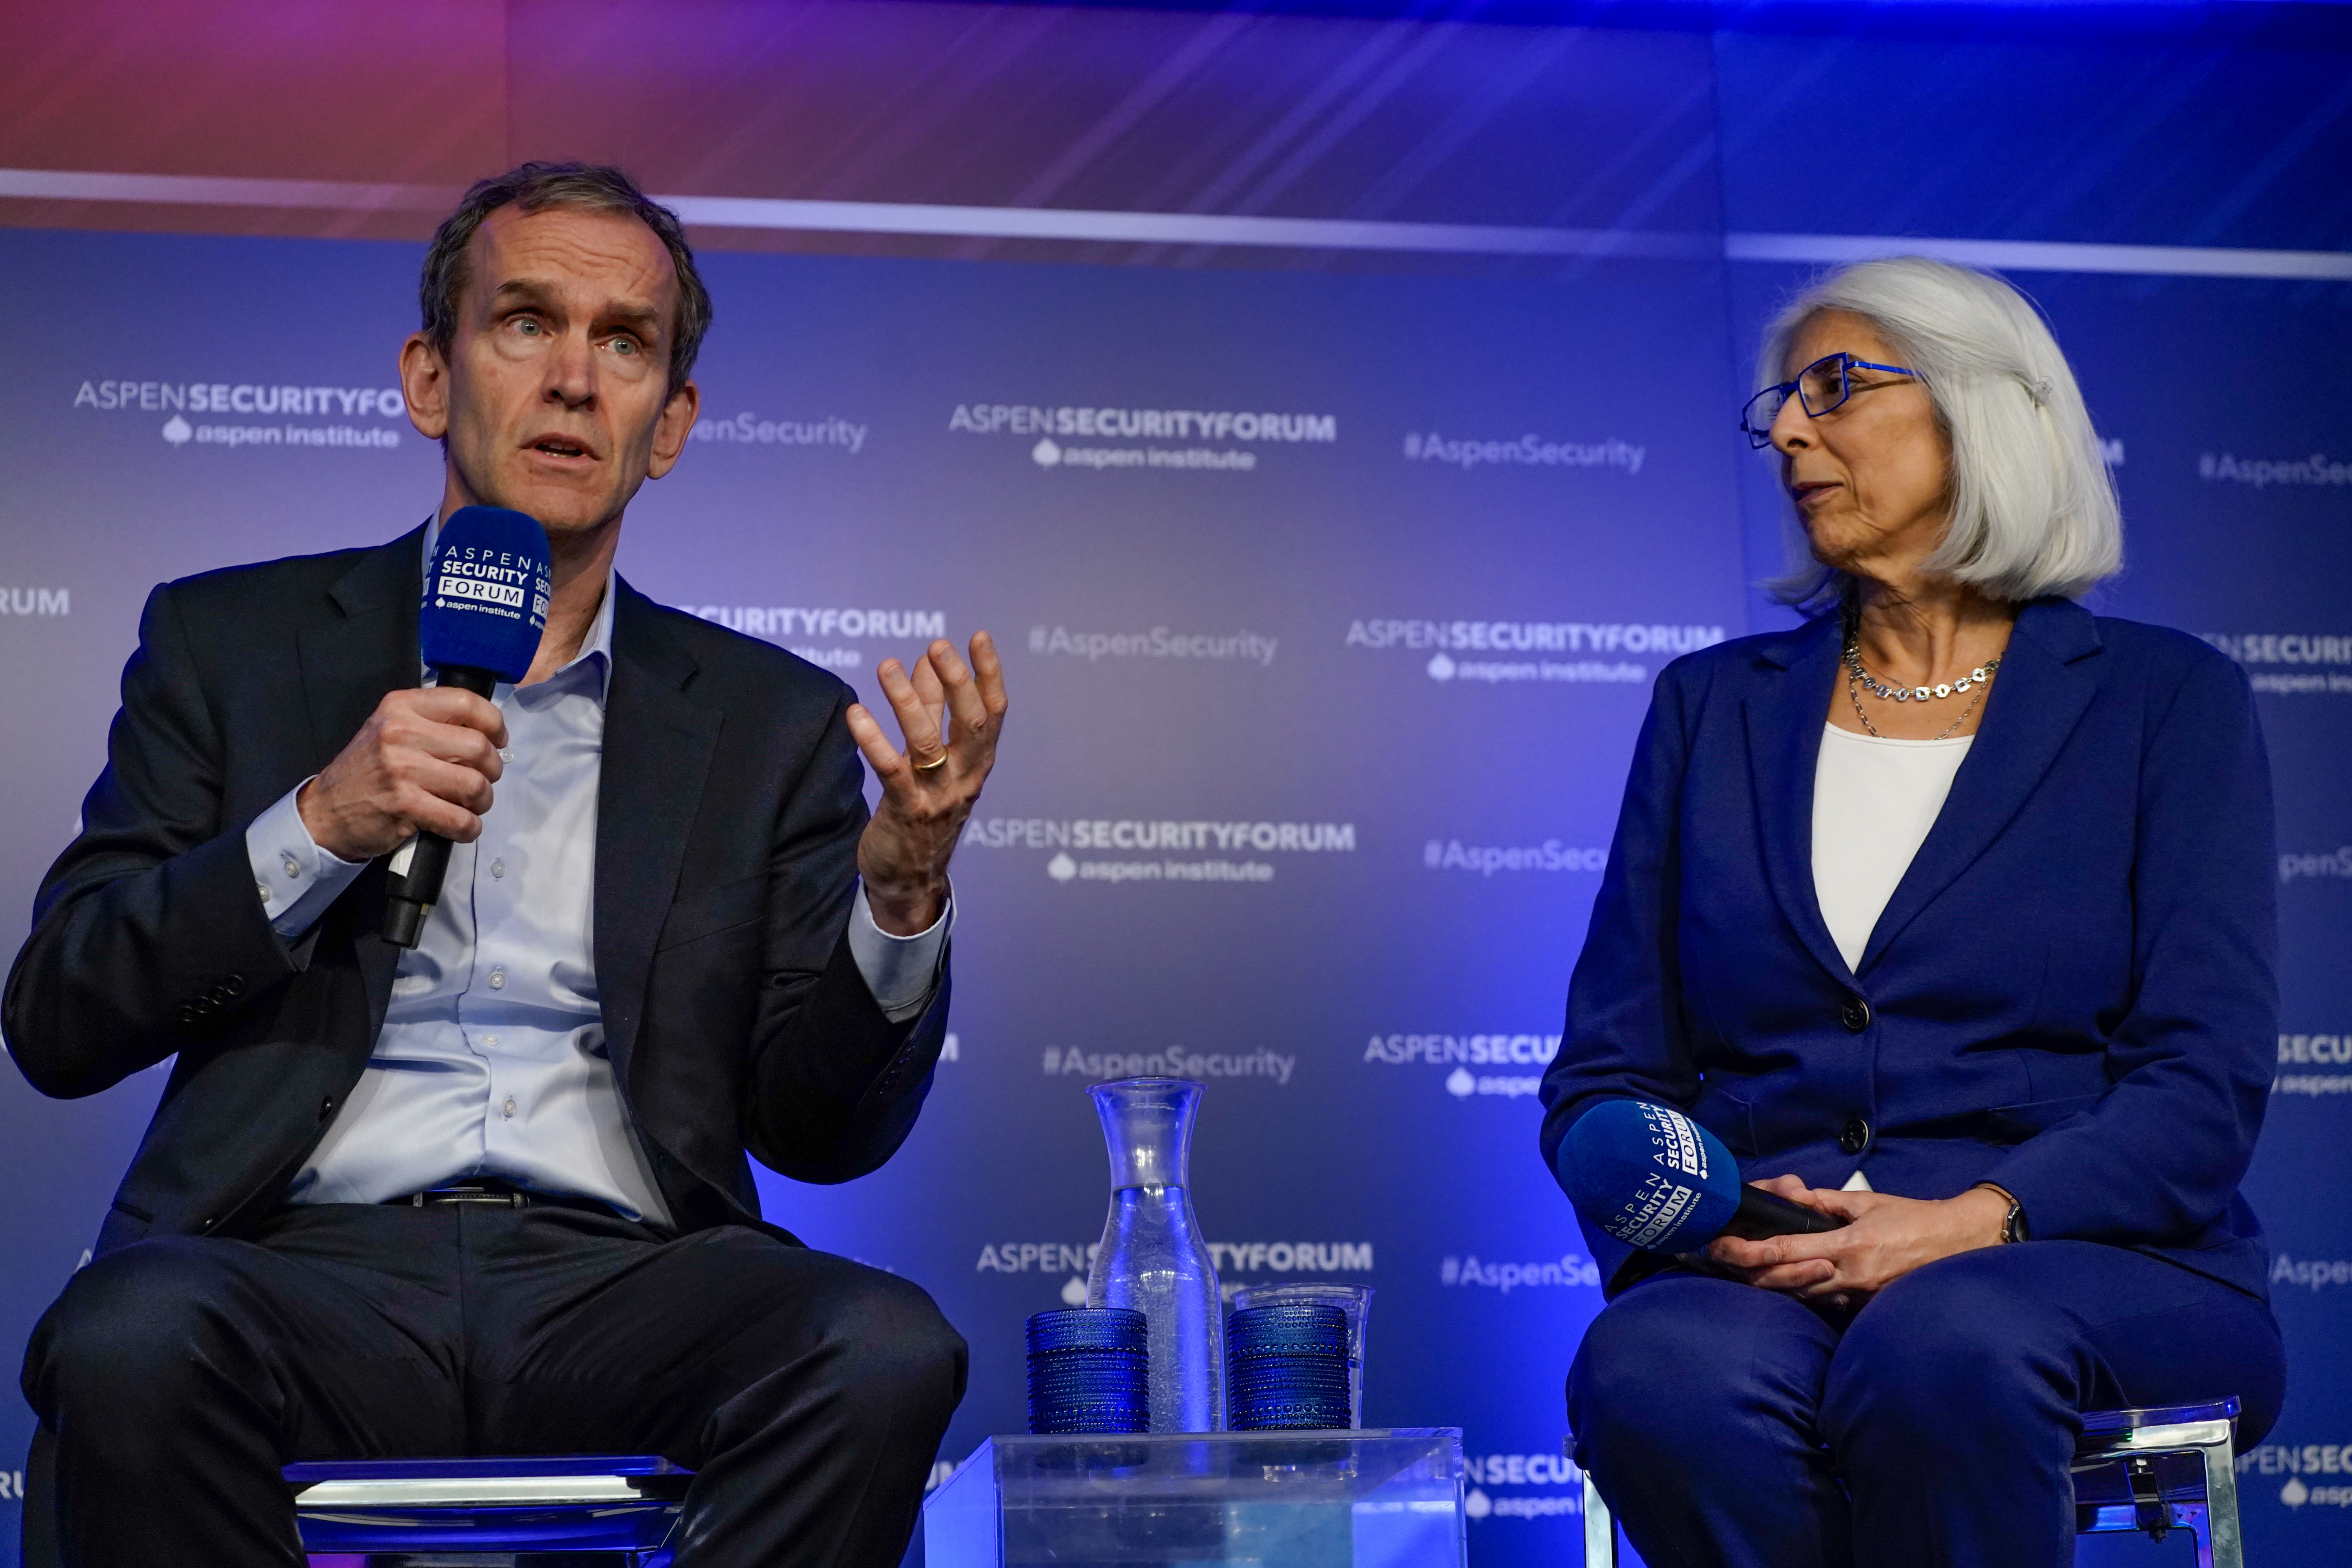 Google's Kent Walker speaks into a microphone next to Dr. Arati Prabhakar, (Director, White House OSTP) during a panel at the Aspen Security Forum.